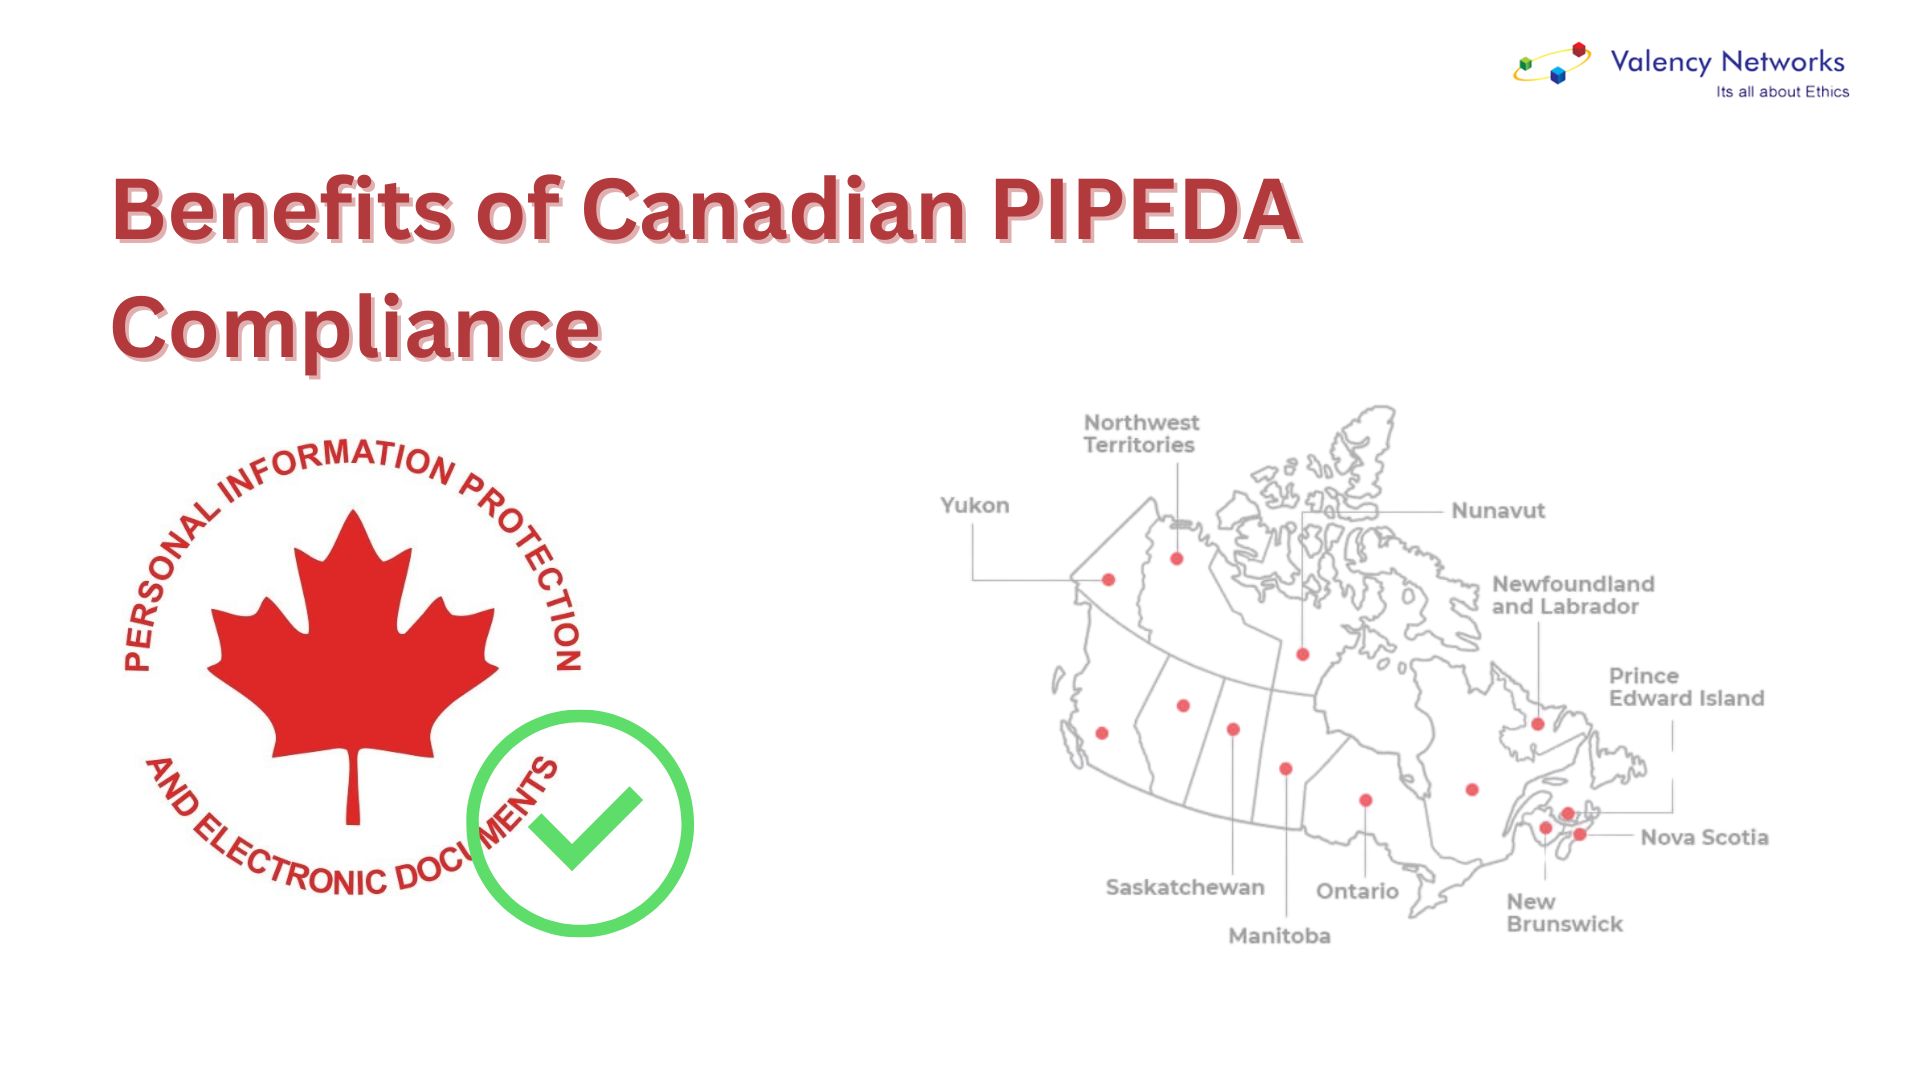 Benefits of Canada PIPEDA compliance